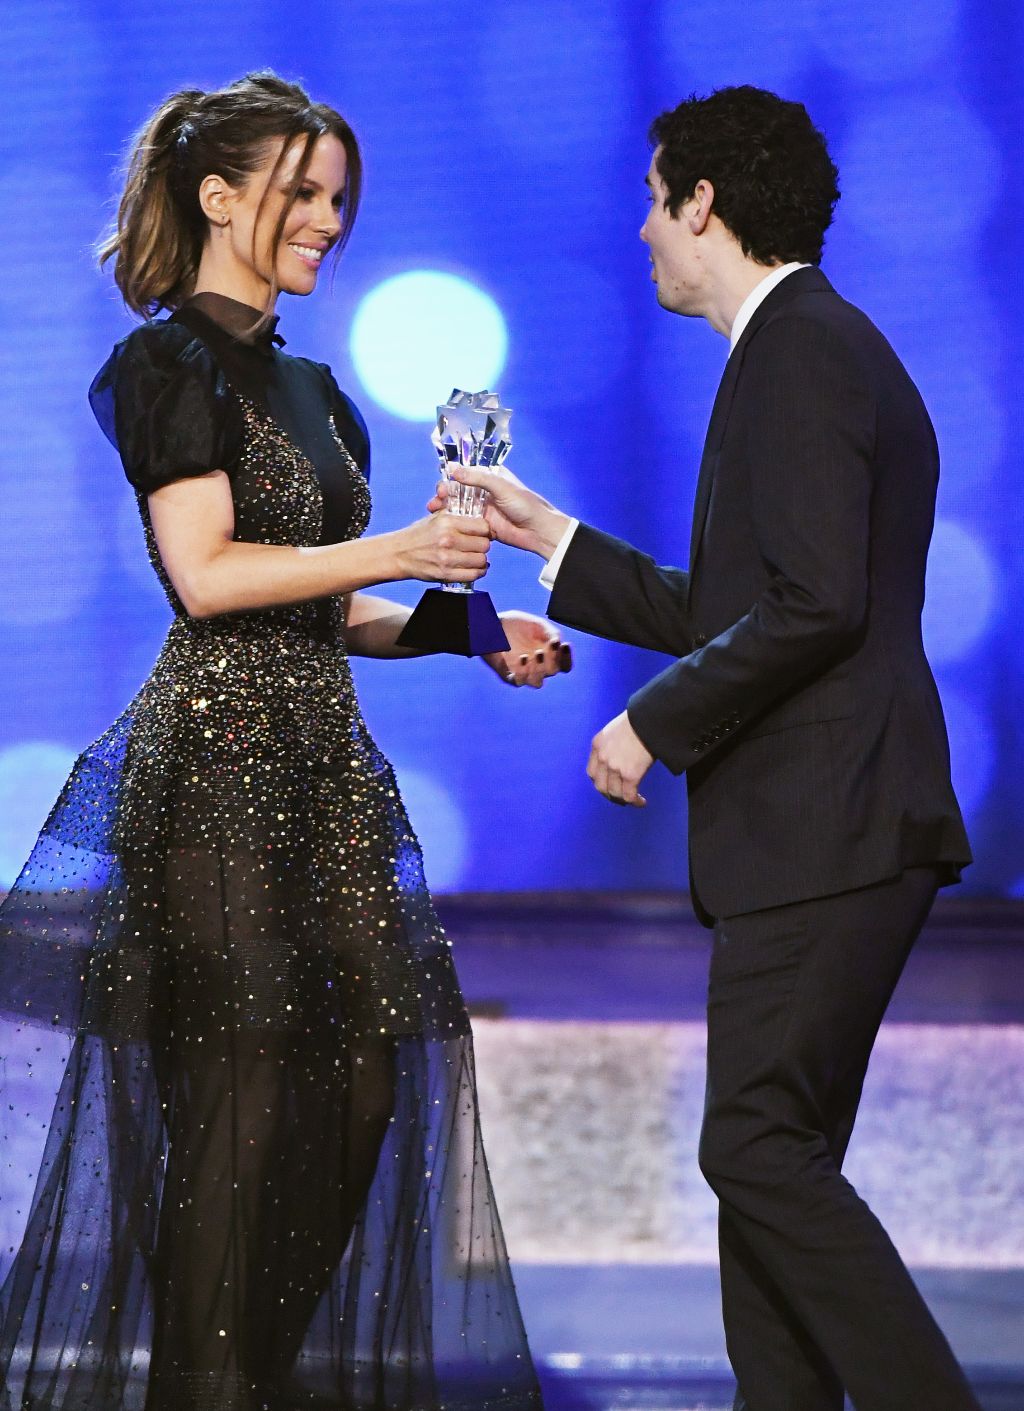 SANTA MONICA, CA - DECEMBER 11: Director Damien Chazelle (R) accepts Best Director for 'La La Land' from actress Kate Beckinsale onstage during the The 22nd Annual Critics' Choice Awards at Barker Hangar on December 11, 2016 in Santa Monica, California. (Photo by Ethan Miller/Getty Images)